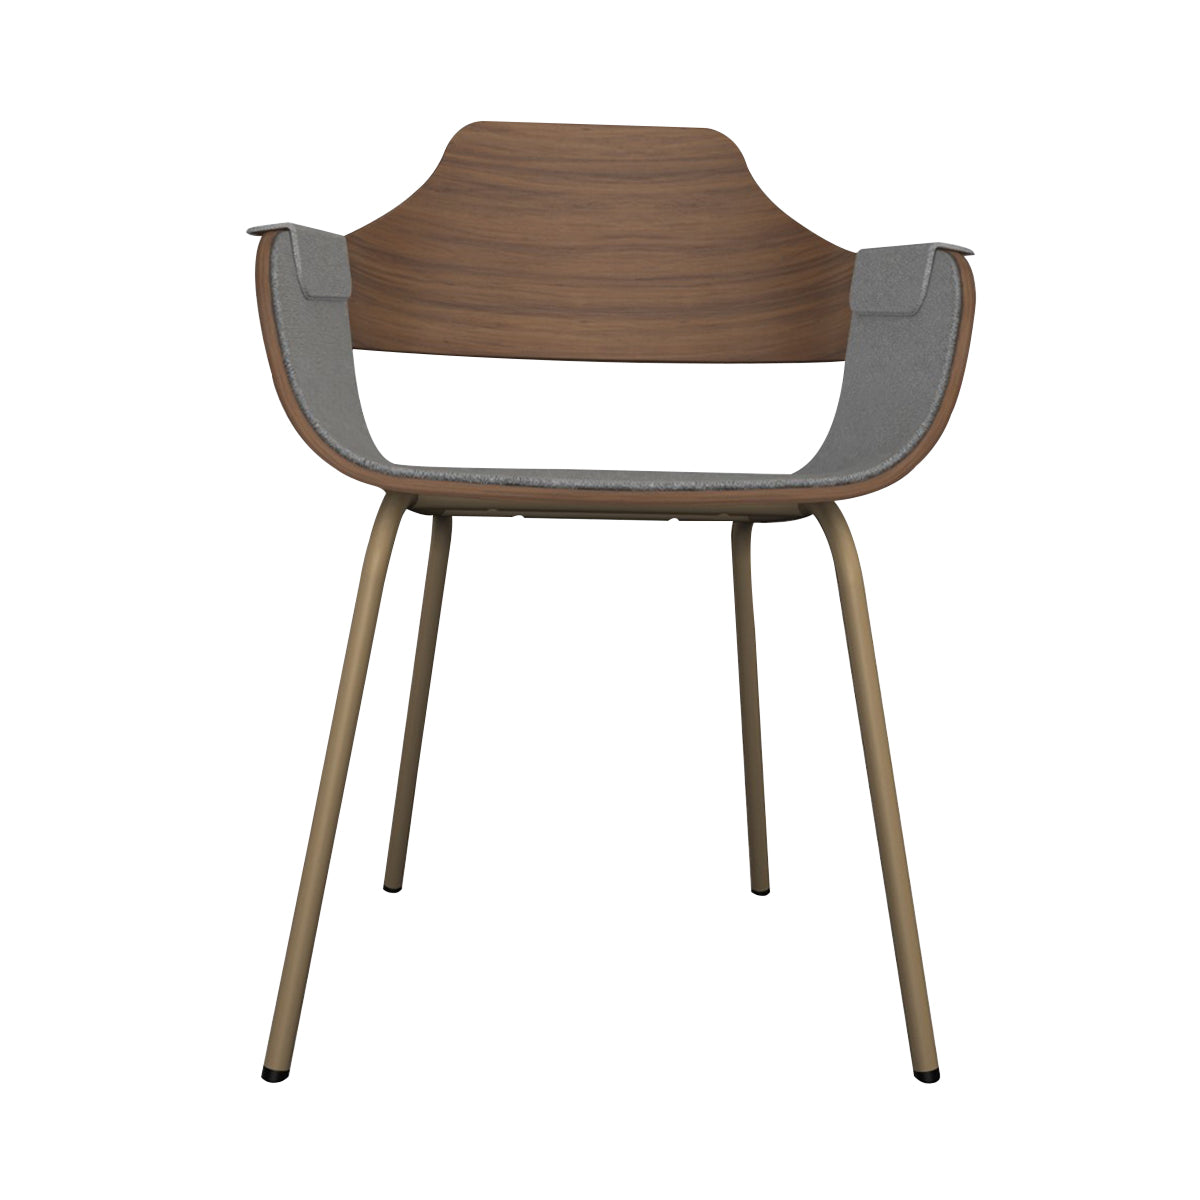 Showtime Chair with Metal Base: Interior Seat + Armrest Upholstered + Beige